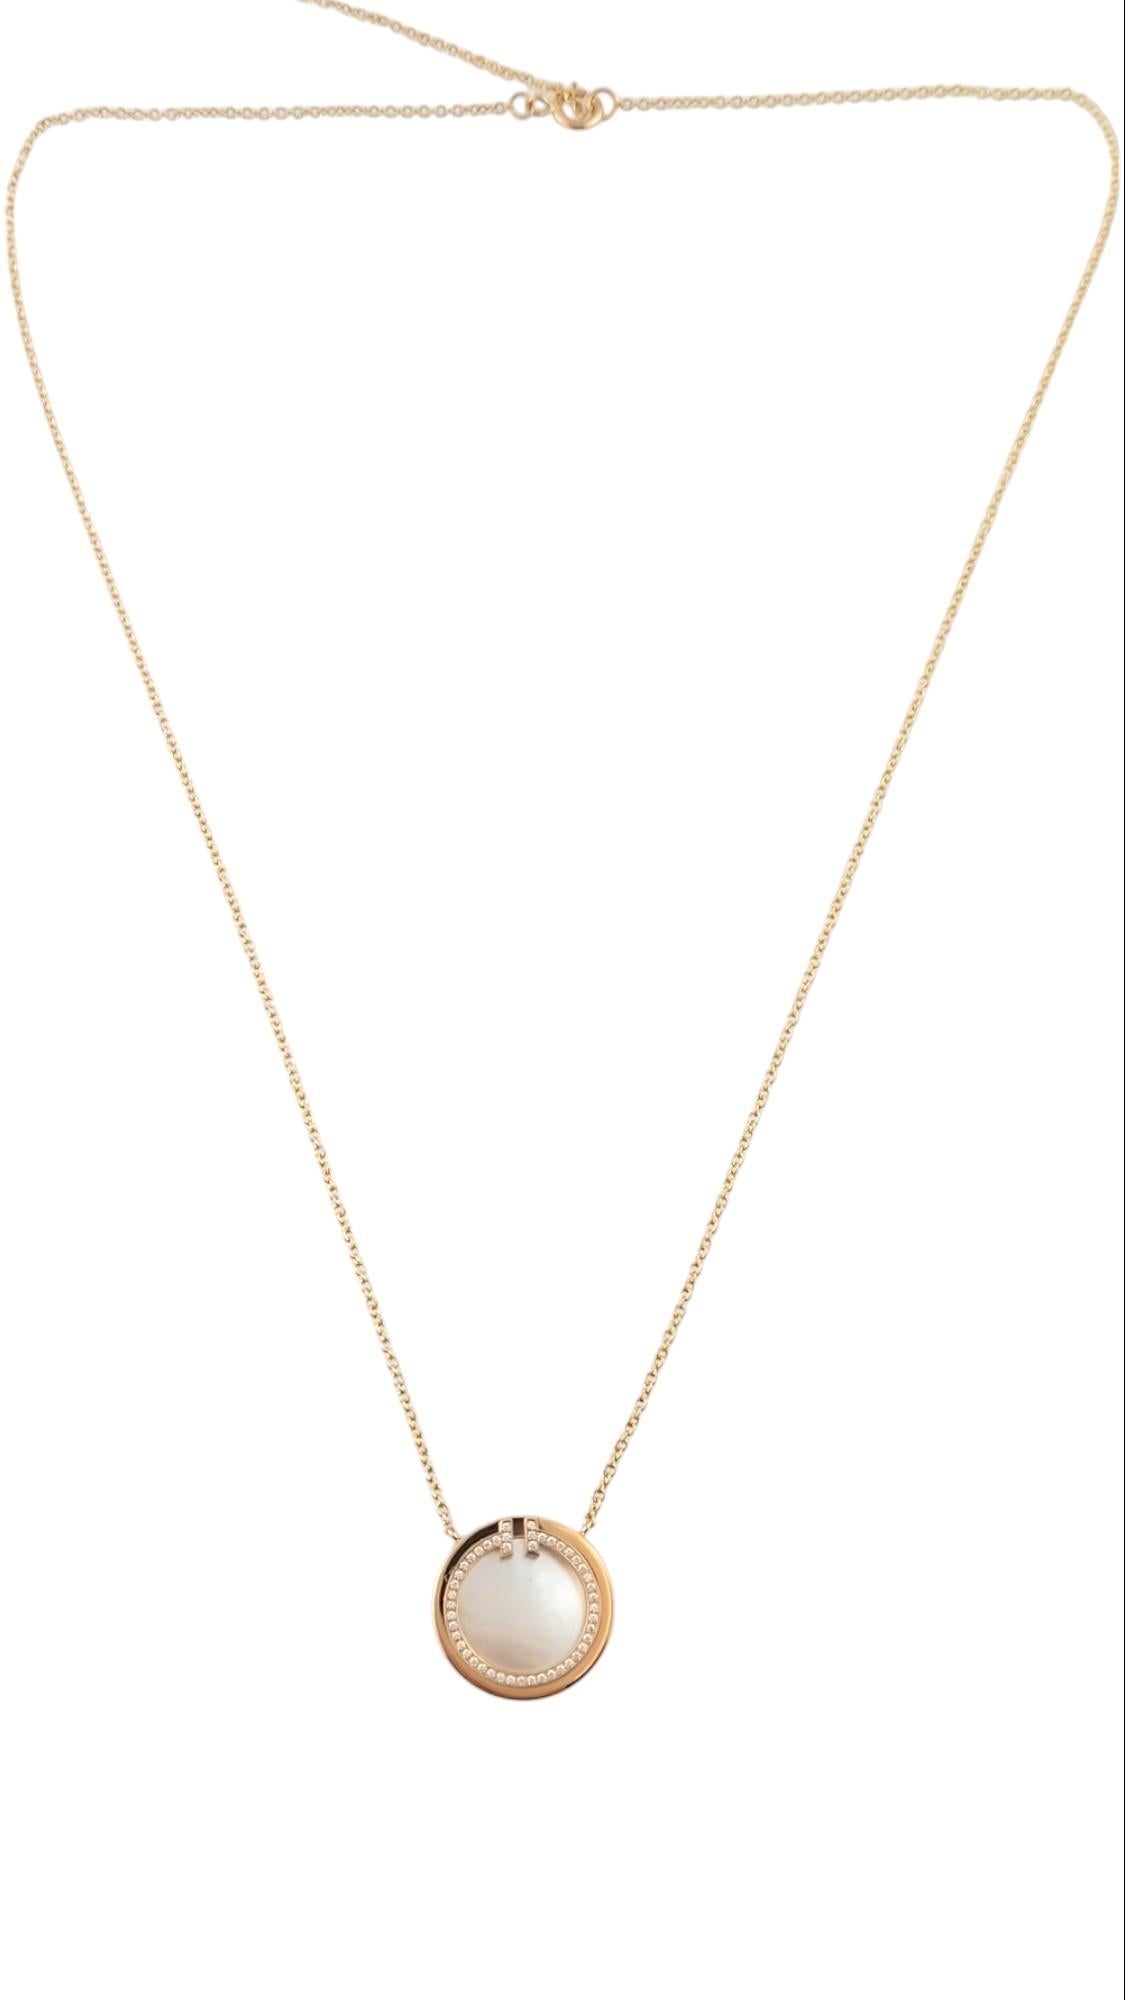 Tiffany & Co. 18K Rose Gold Diamond Mother of Pearl Necklace 

This gorgeous Tiffany & Co 18K rose gold necklace features a beautiful mother of pearl pendant surrounded by 46 sparkling round brilliant cut diamonds!

Approximate total diamond weight: